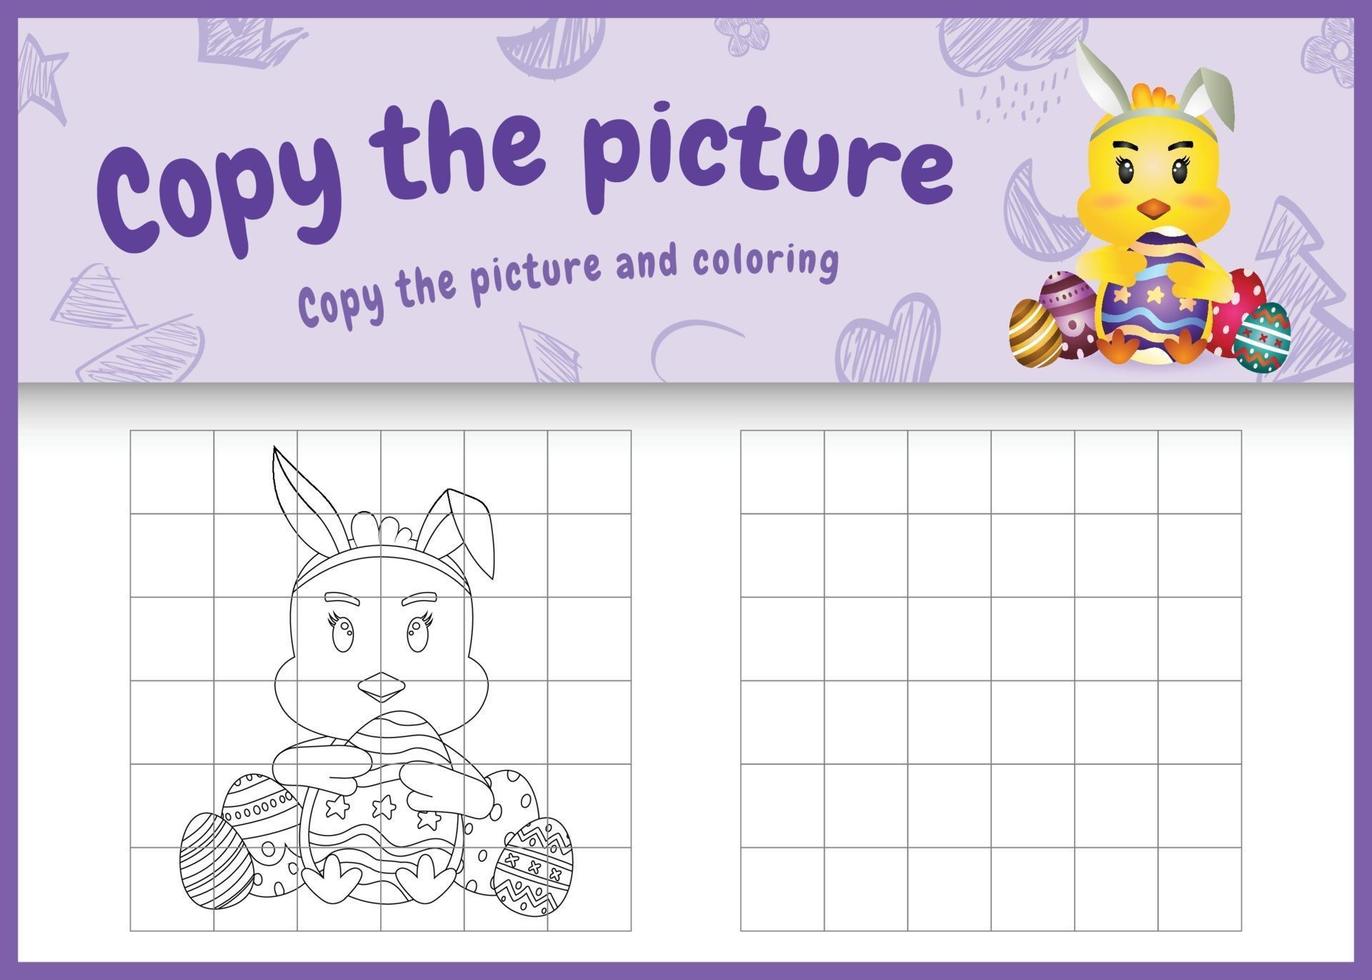 copy the picture kids game and coloring page themed easter with a cute chick using bunny ears headbands hugging eggs vector